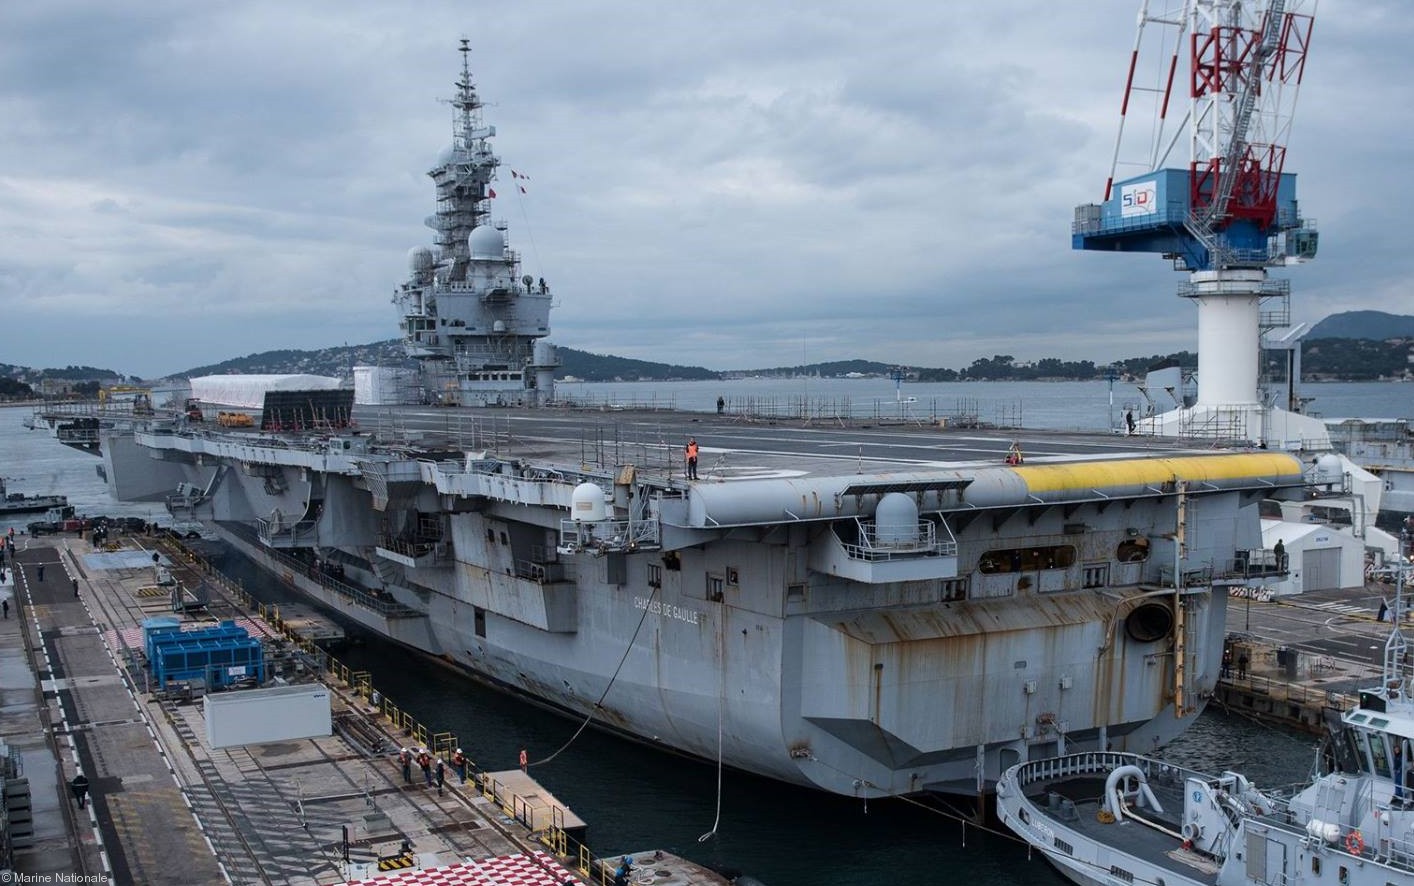  r-91 fs charles de gaulle aircraft carrier french navy 29 dry dock